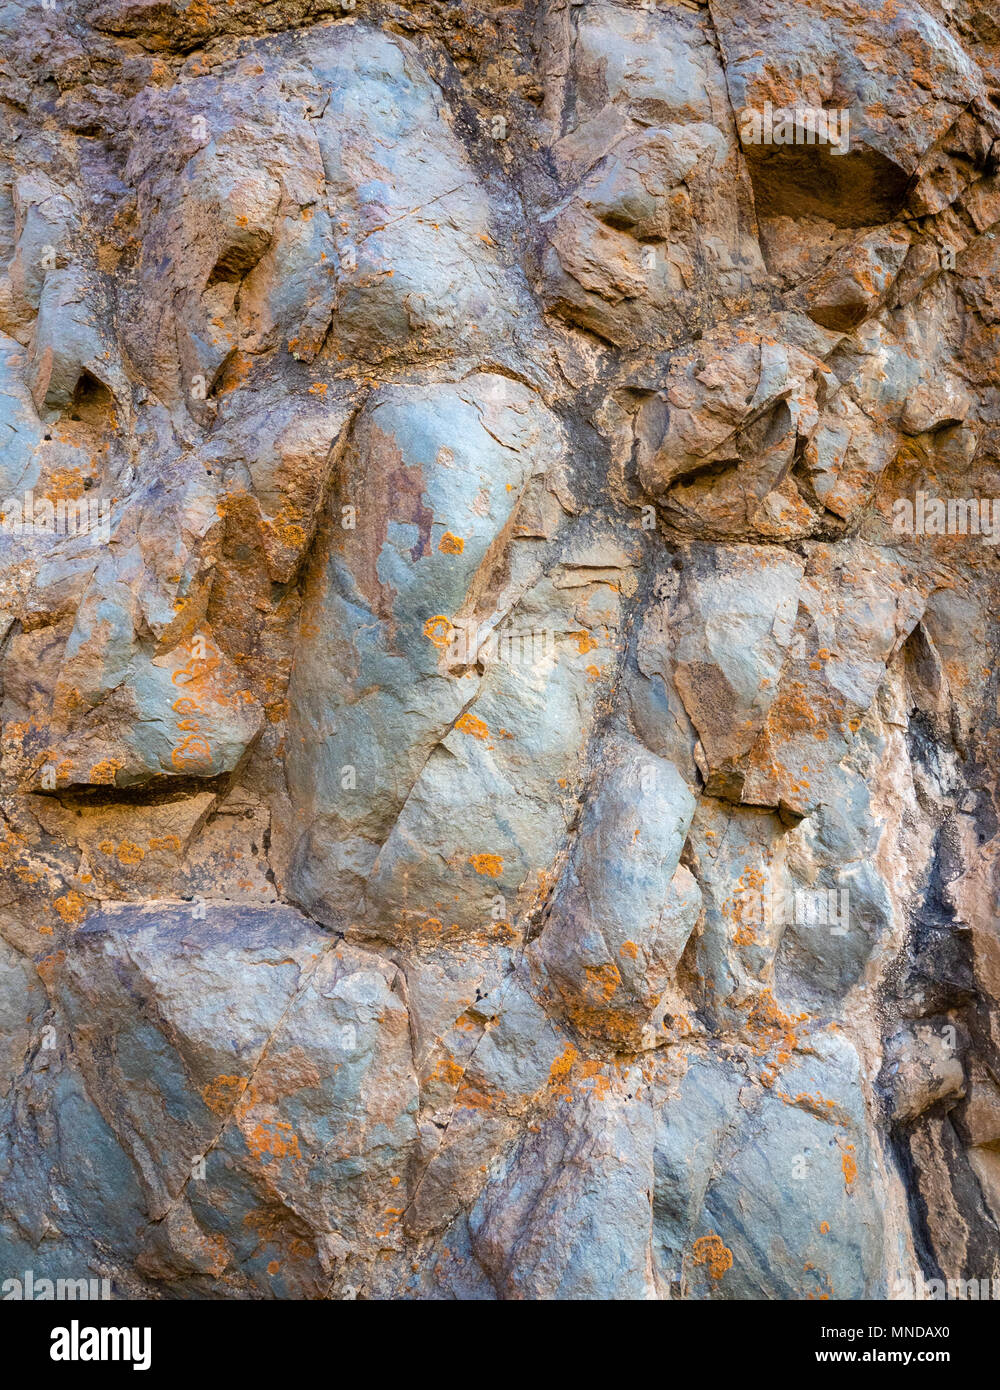 Weathered surface of jointed blocks in basalt on La Catedral a volcanic plug in the Roques de Garcia on El Teide volcano Canary Islands Stock Photo